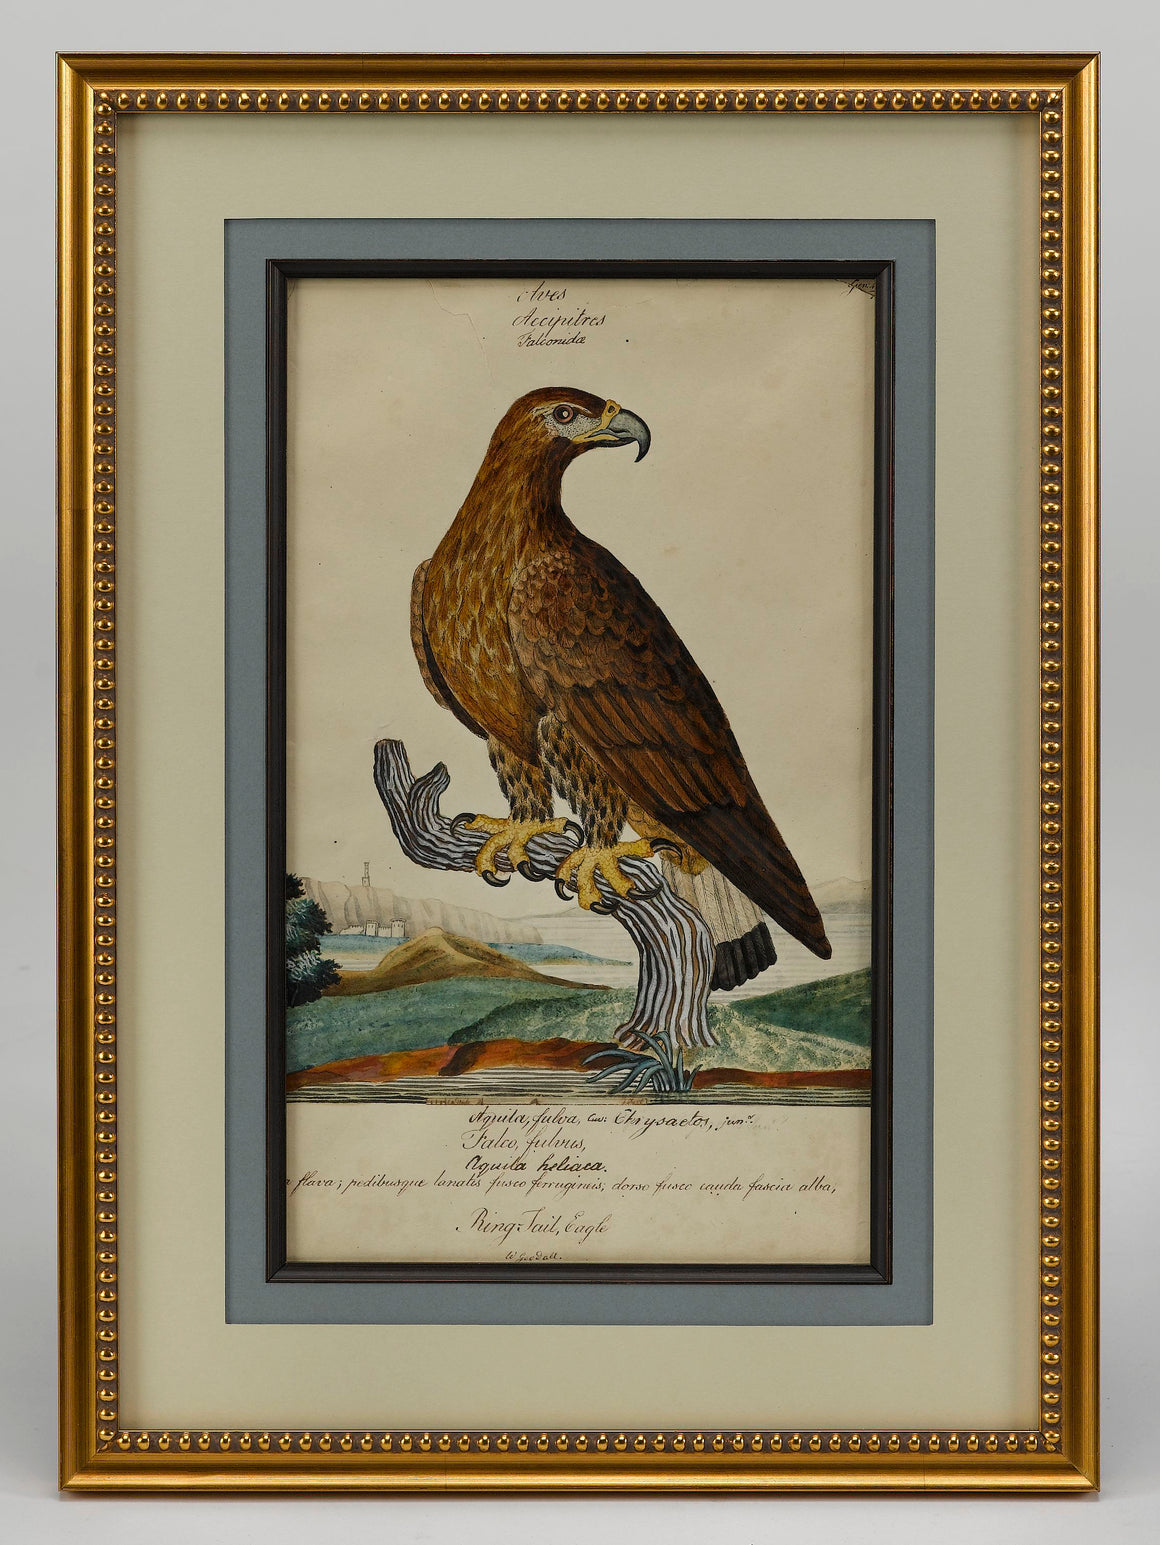 "Ring Tail Eagle" by William Goodall, Watercolor and Ink Drawing, Early 19th Century